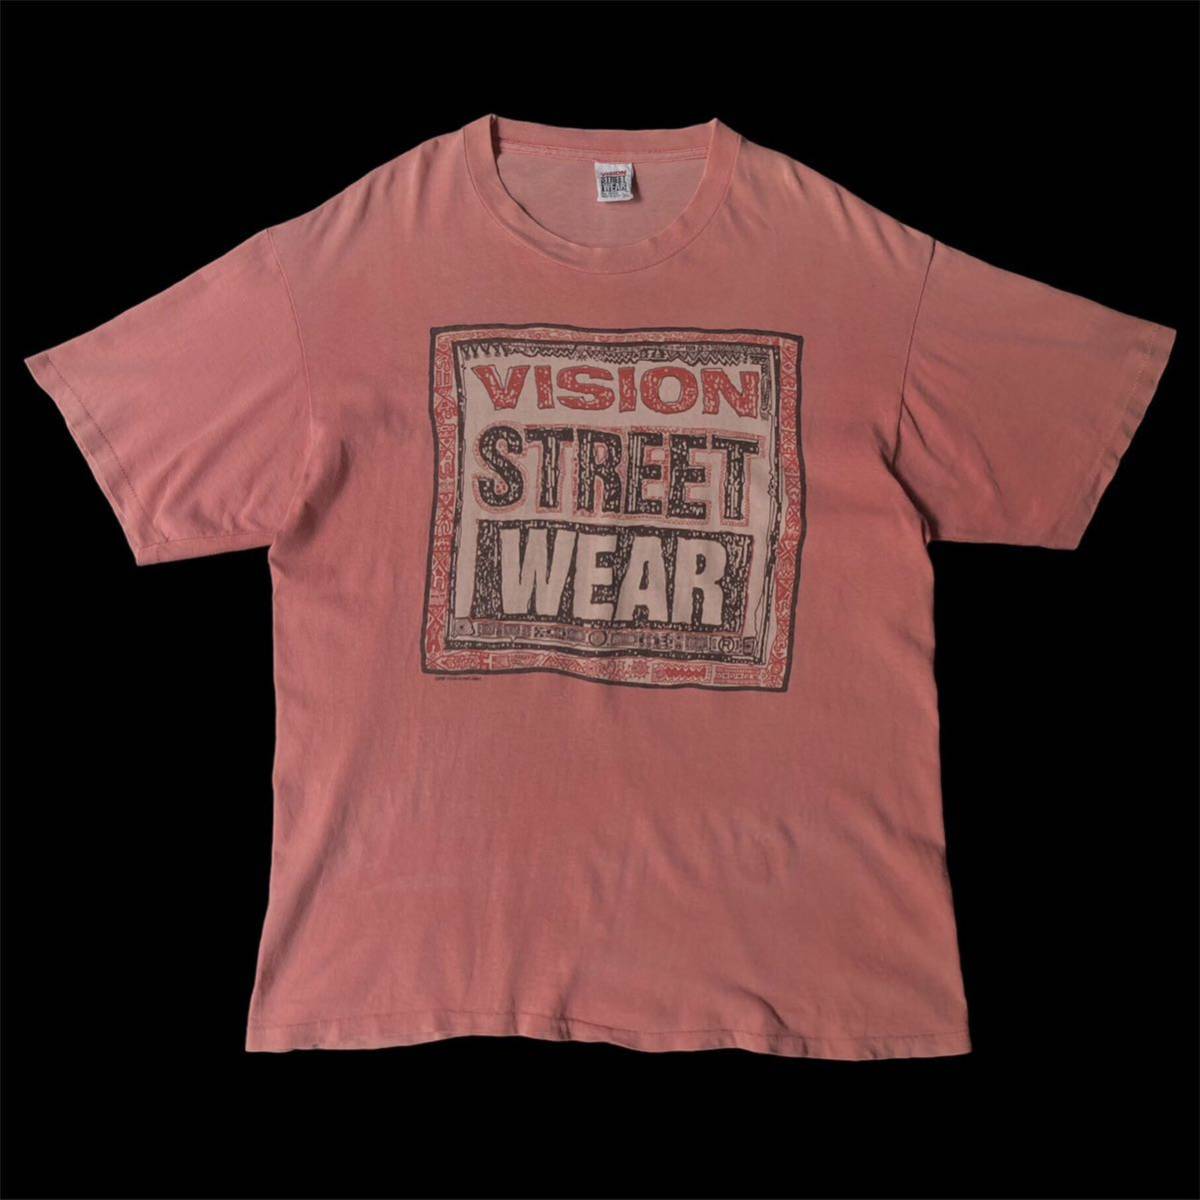 80s Vision Street Wear Logo Print Tee made in USA 1987 80年代 ビジョン ストリートウェア ロゴ プリント Tシャツ アメリカ製 vintage